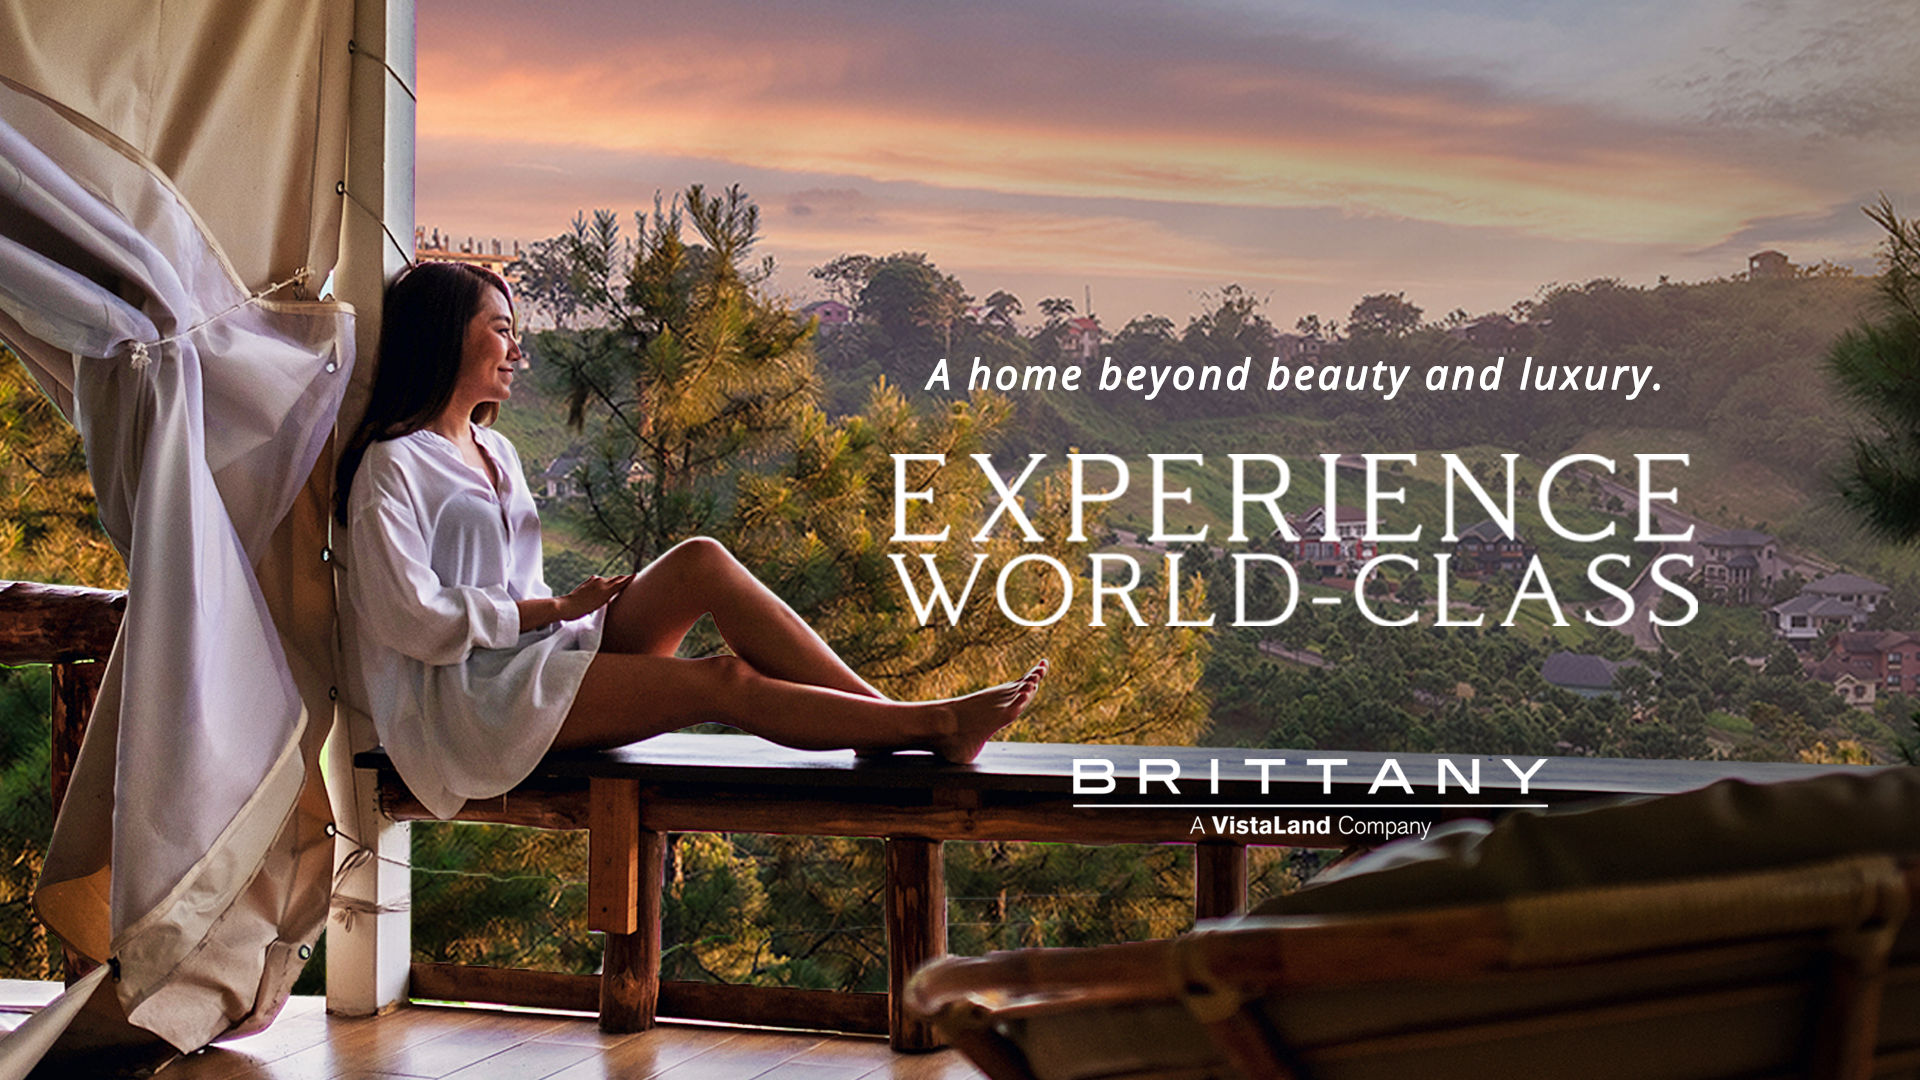 Experience world-class luxury homes with Brittany Corporation